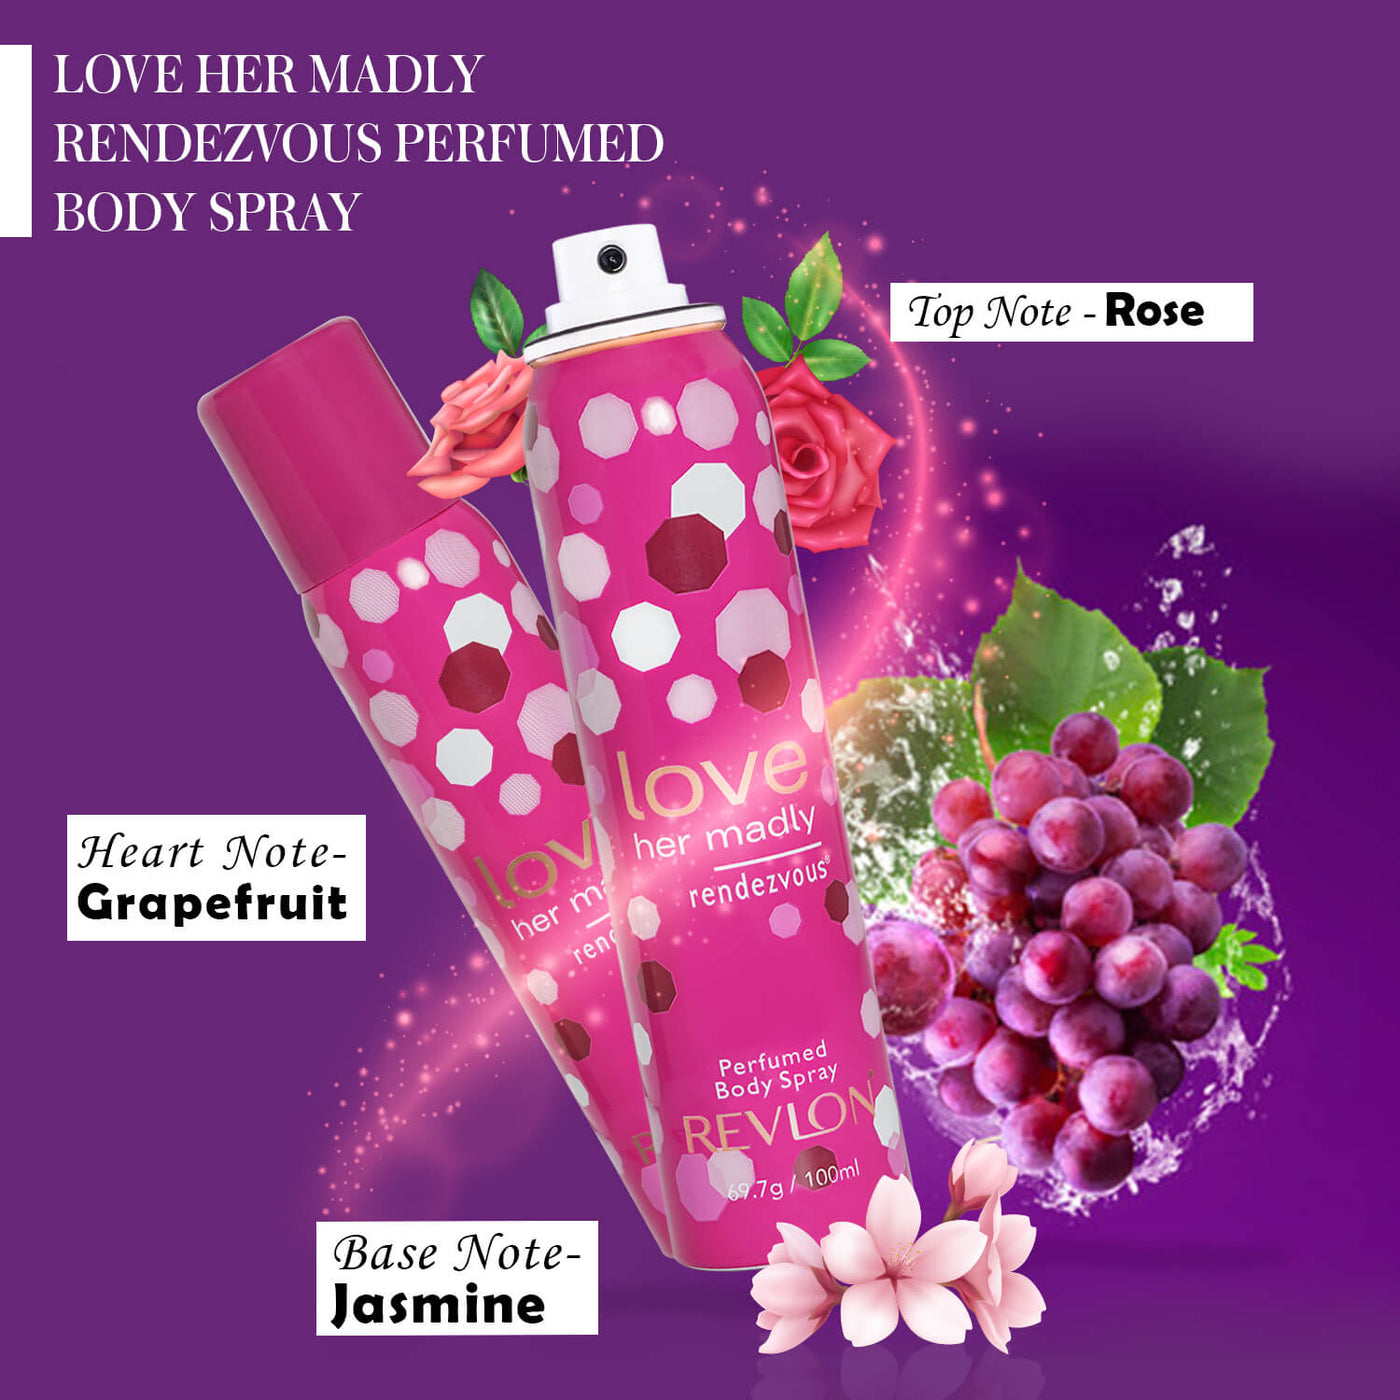 E-COM KIT (LOVE HER MADLY RENDEZVOUS PBS 100 ML + LOVE HER MADLY PBS 100 ML X 2U)